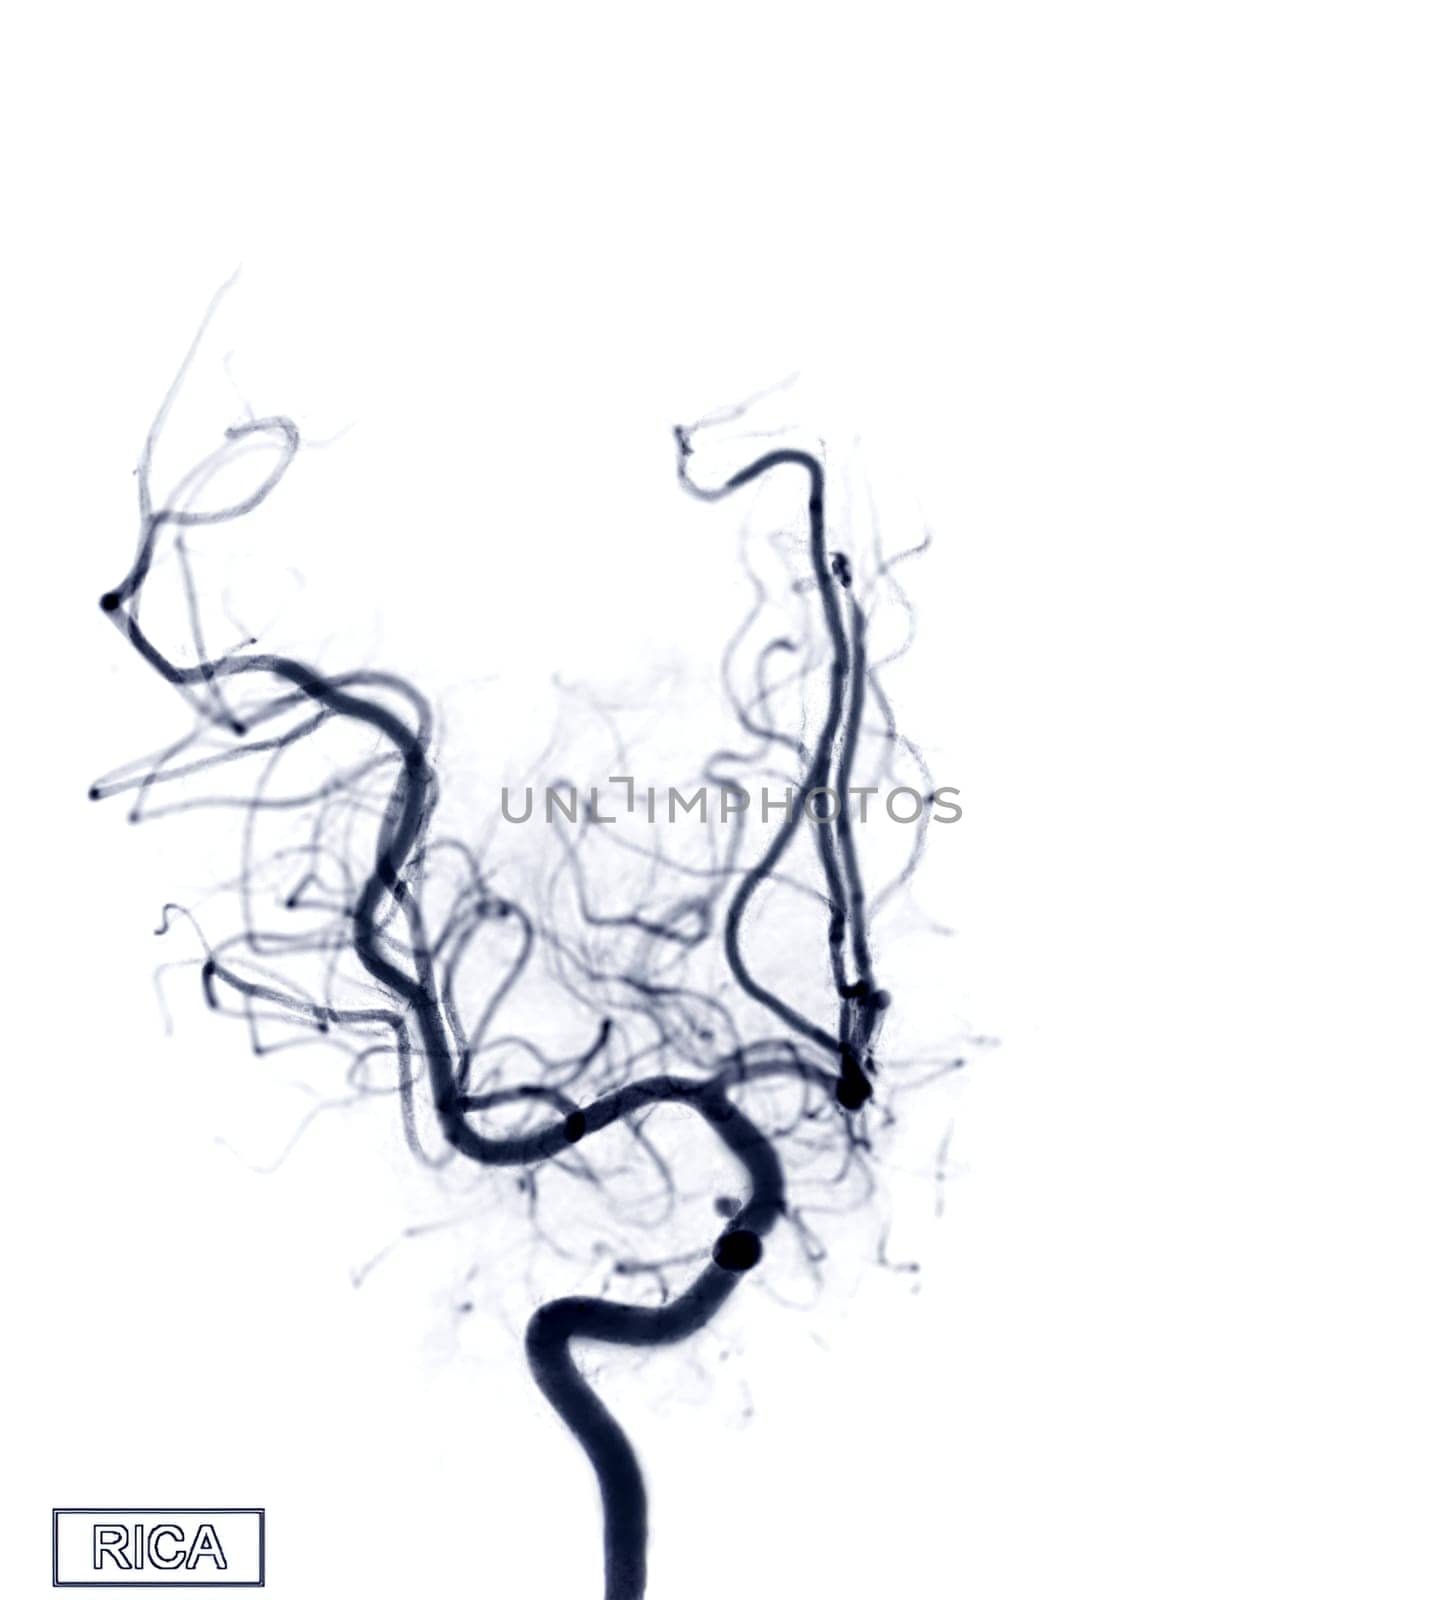 Cerebral angiography  image of RICA from Fluoroscopy in intervention radiology  showing cerebral artery.